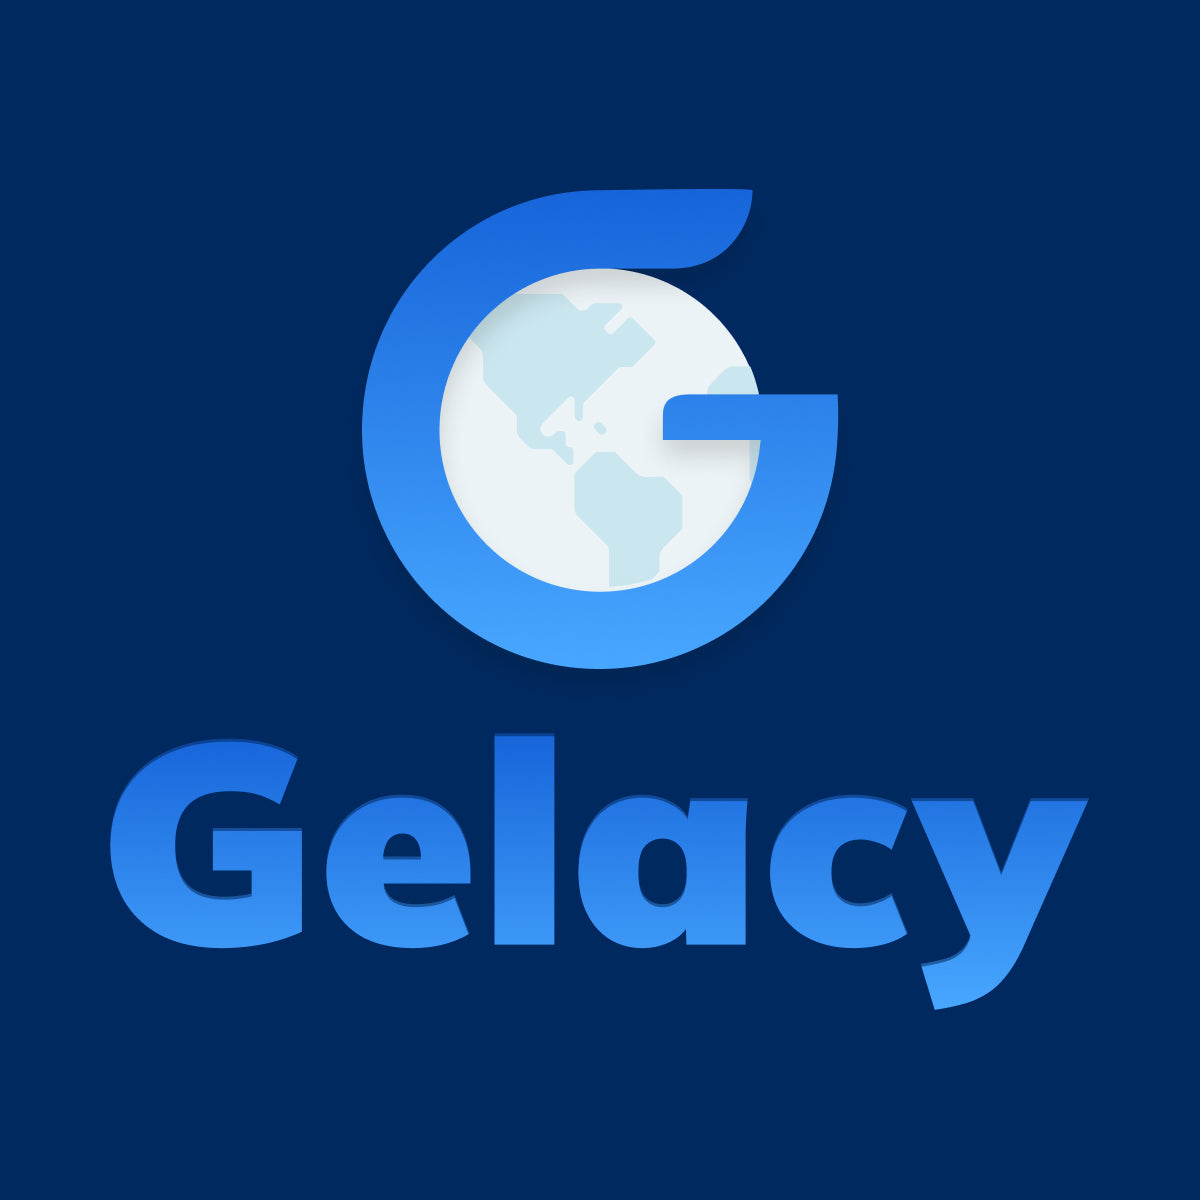 Hire Shopify Experts to integrate Gelacy app into a Shopify store